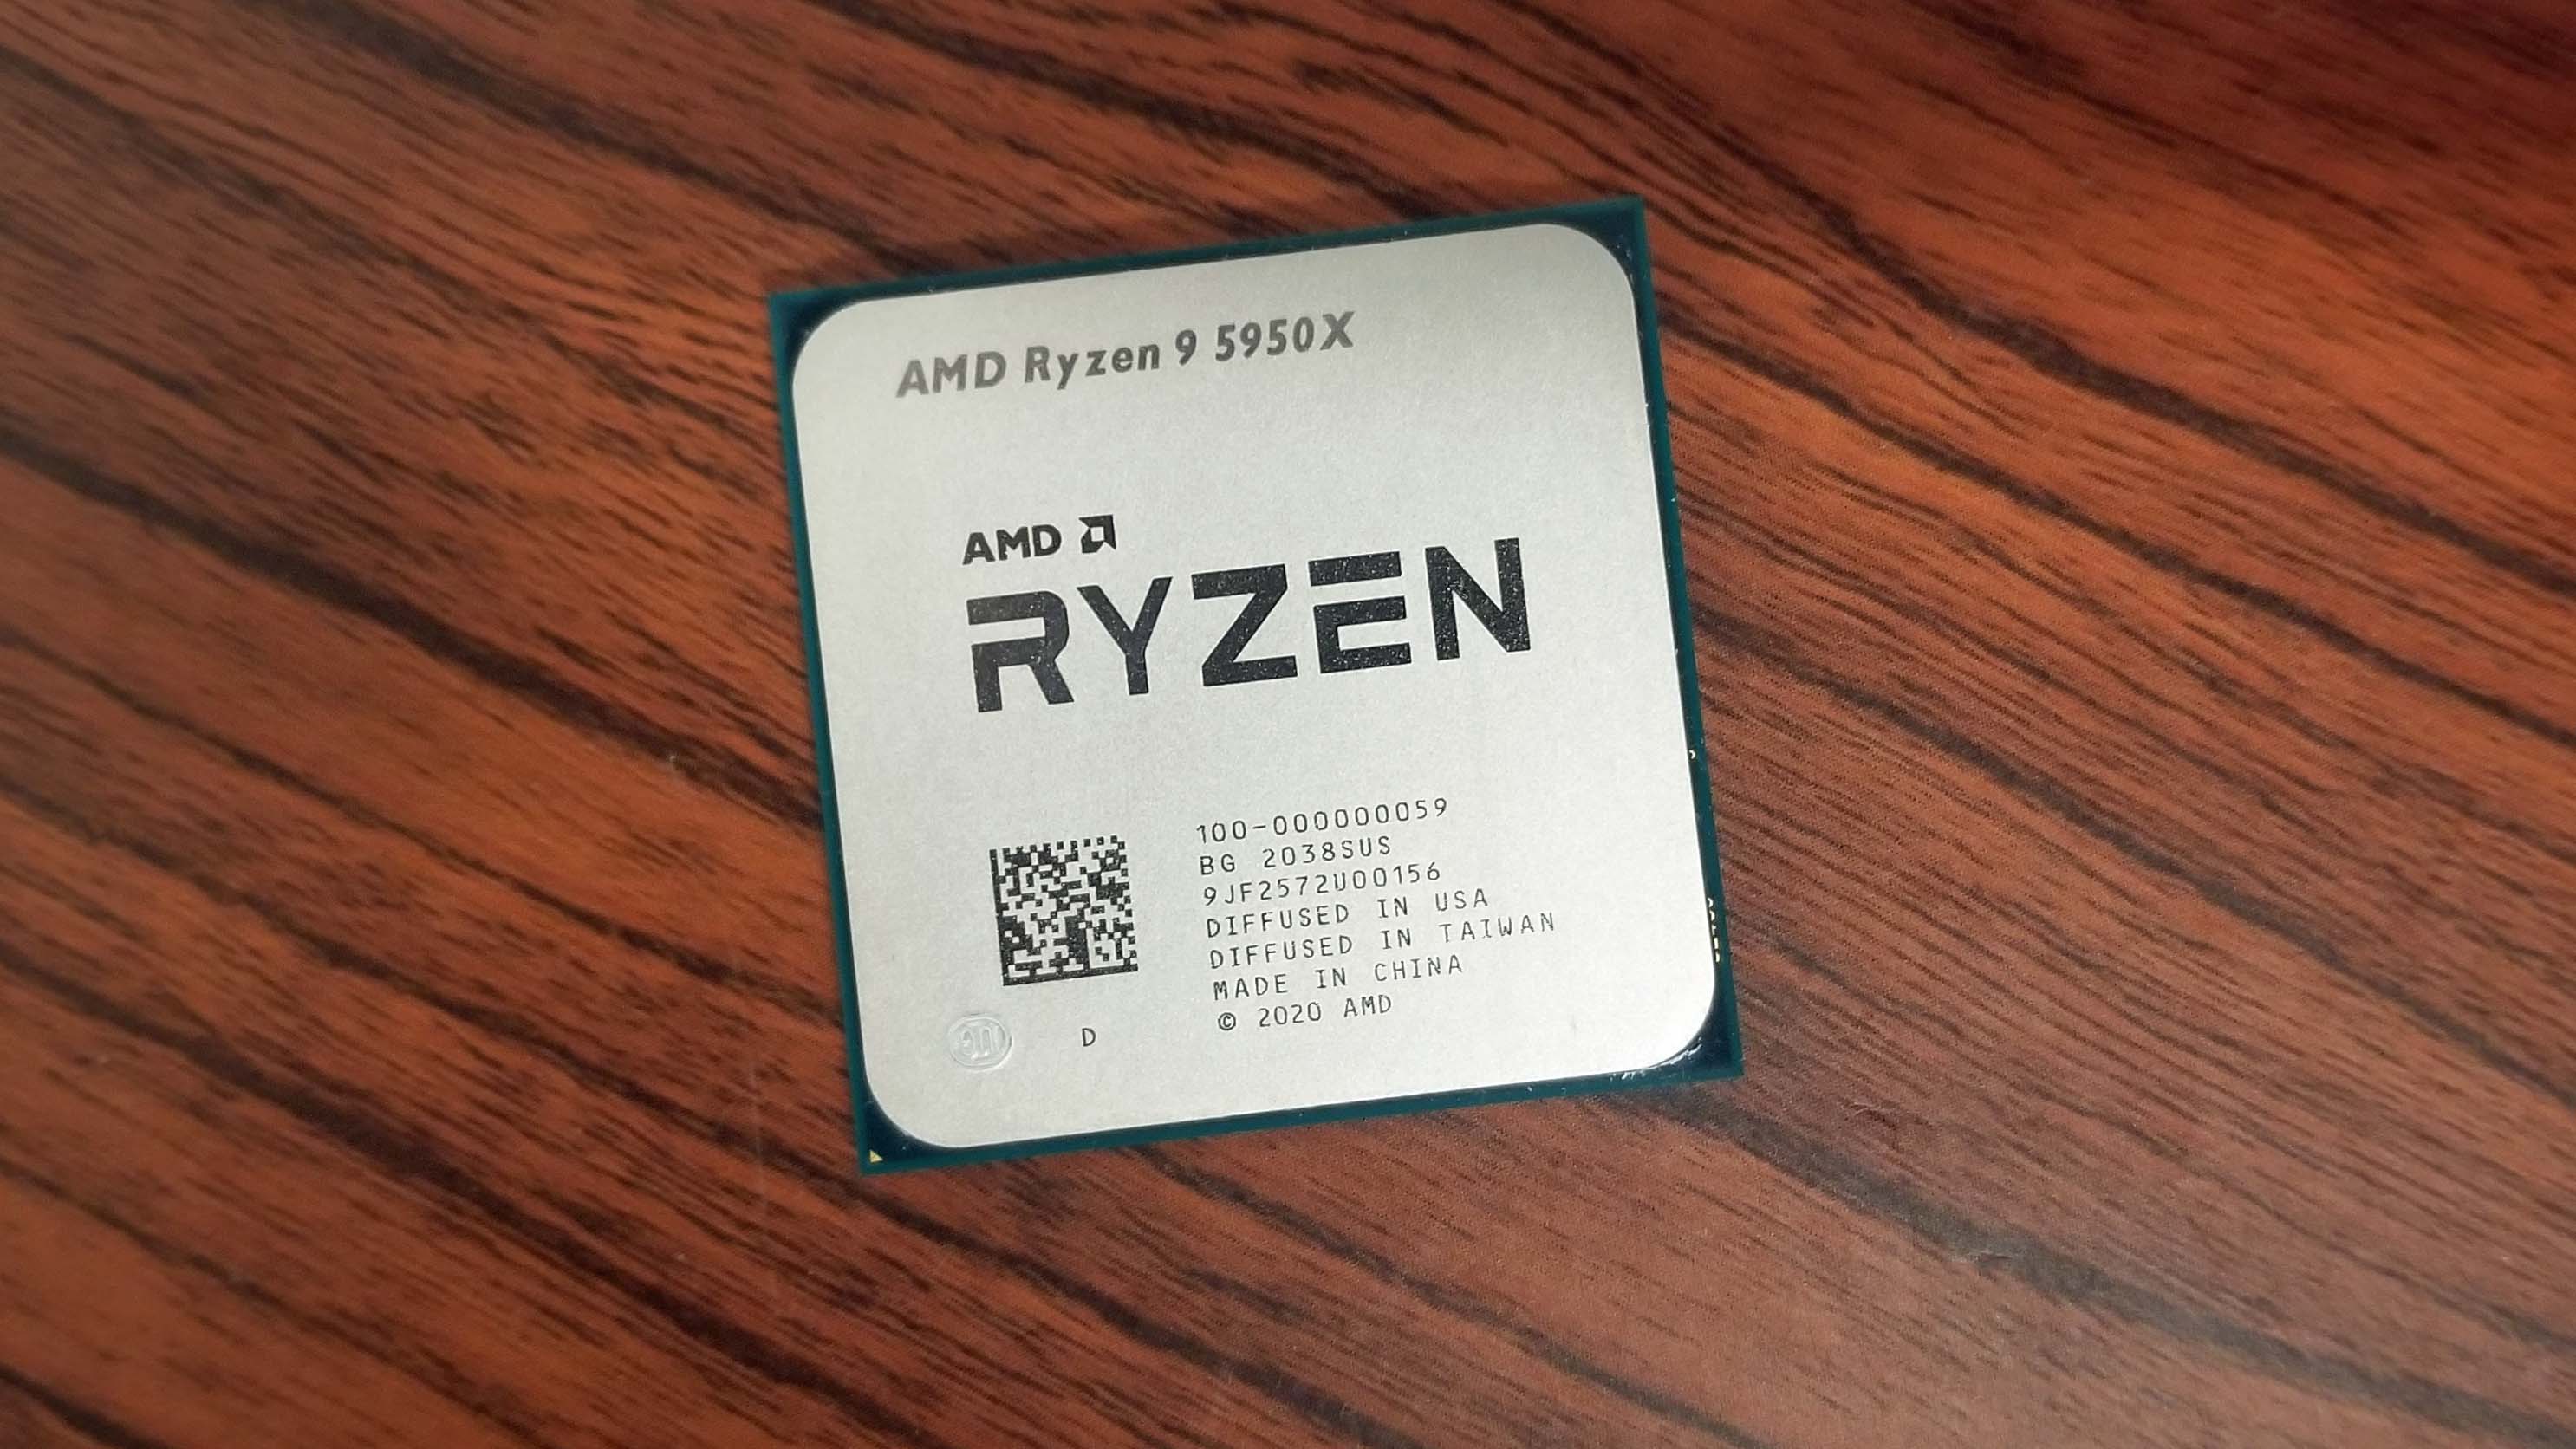 Brother Labe placard AMD Ryzen 9 5950X and Ryzen 9 5900X Power Consumption, Efficiency, Thermals  - AMD Ryzen 9 5950X and 5900X Review: Zen 3 Breaks the 5 GHz Barrier |  Tom's Hardware